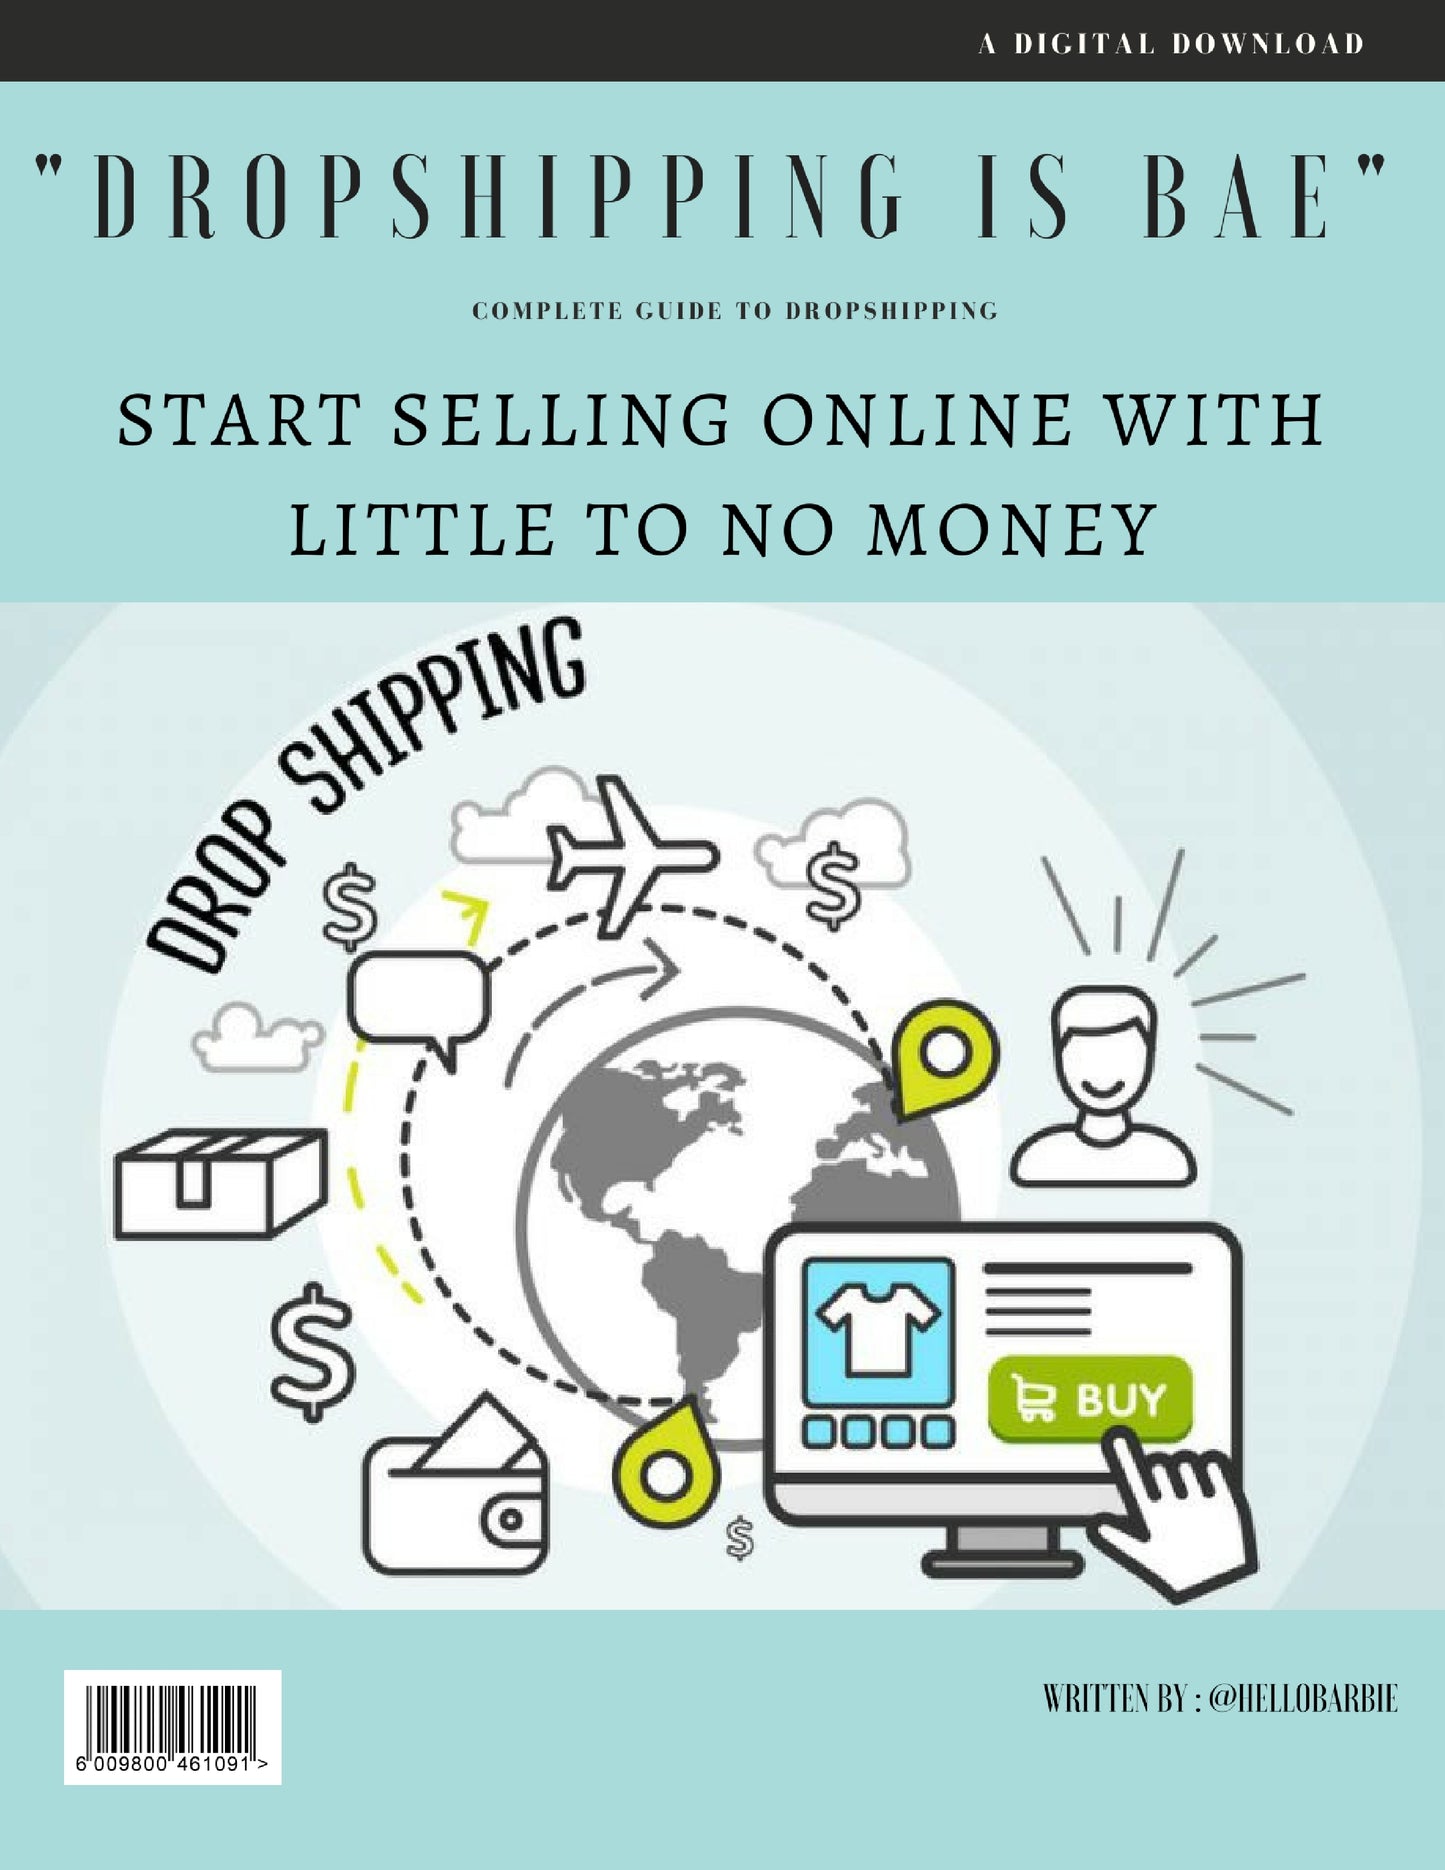 Dropshipping is Bae. Ultimate guide to starting a drop ship business